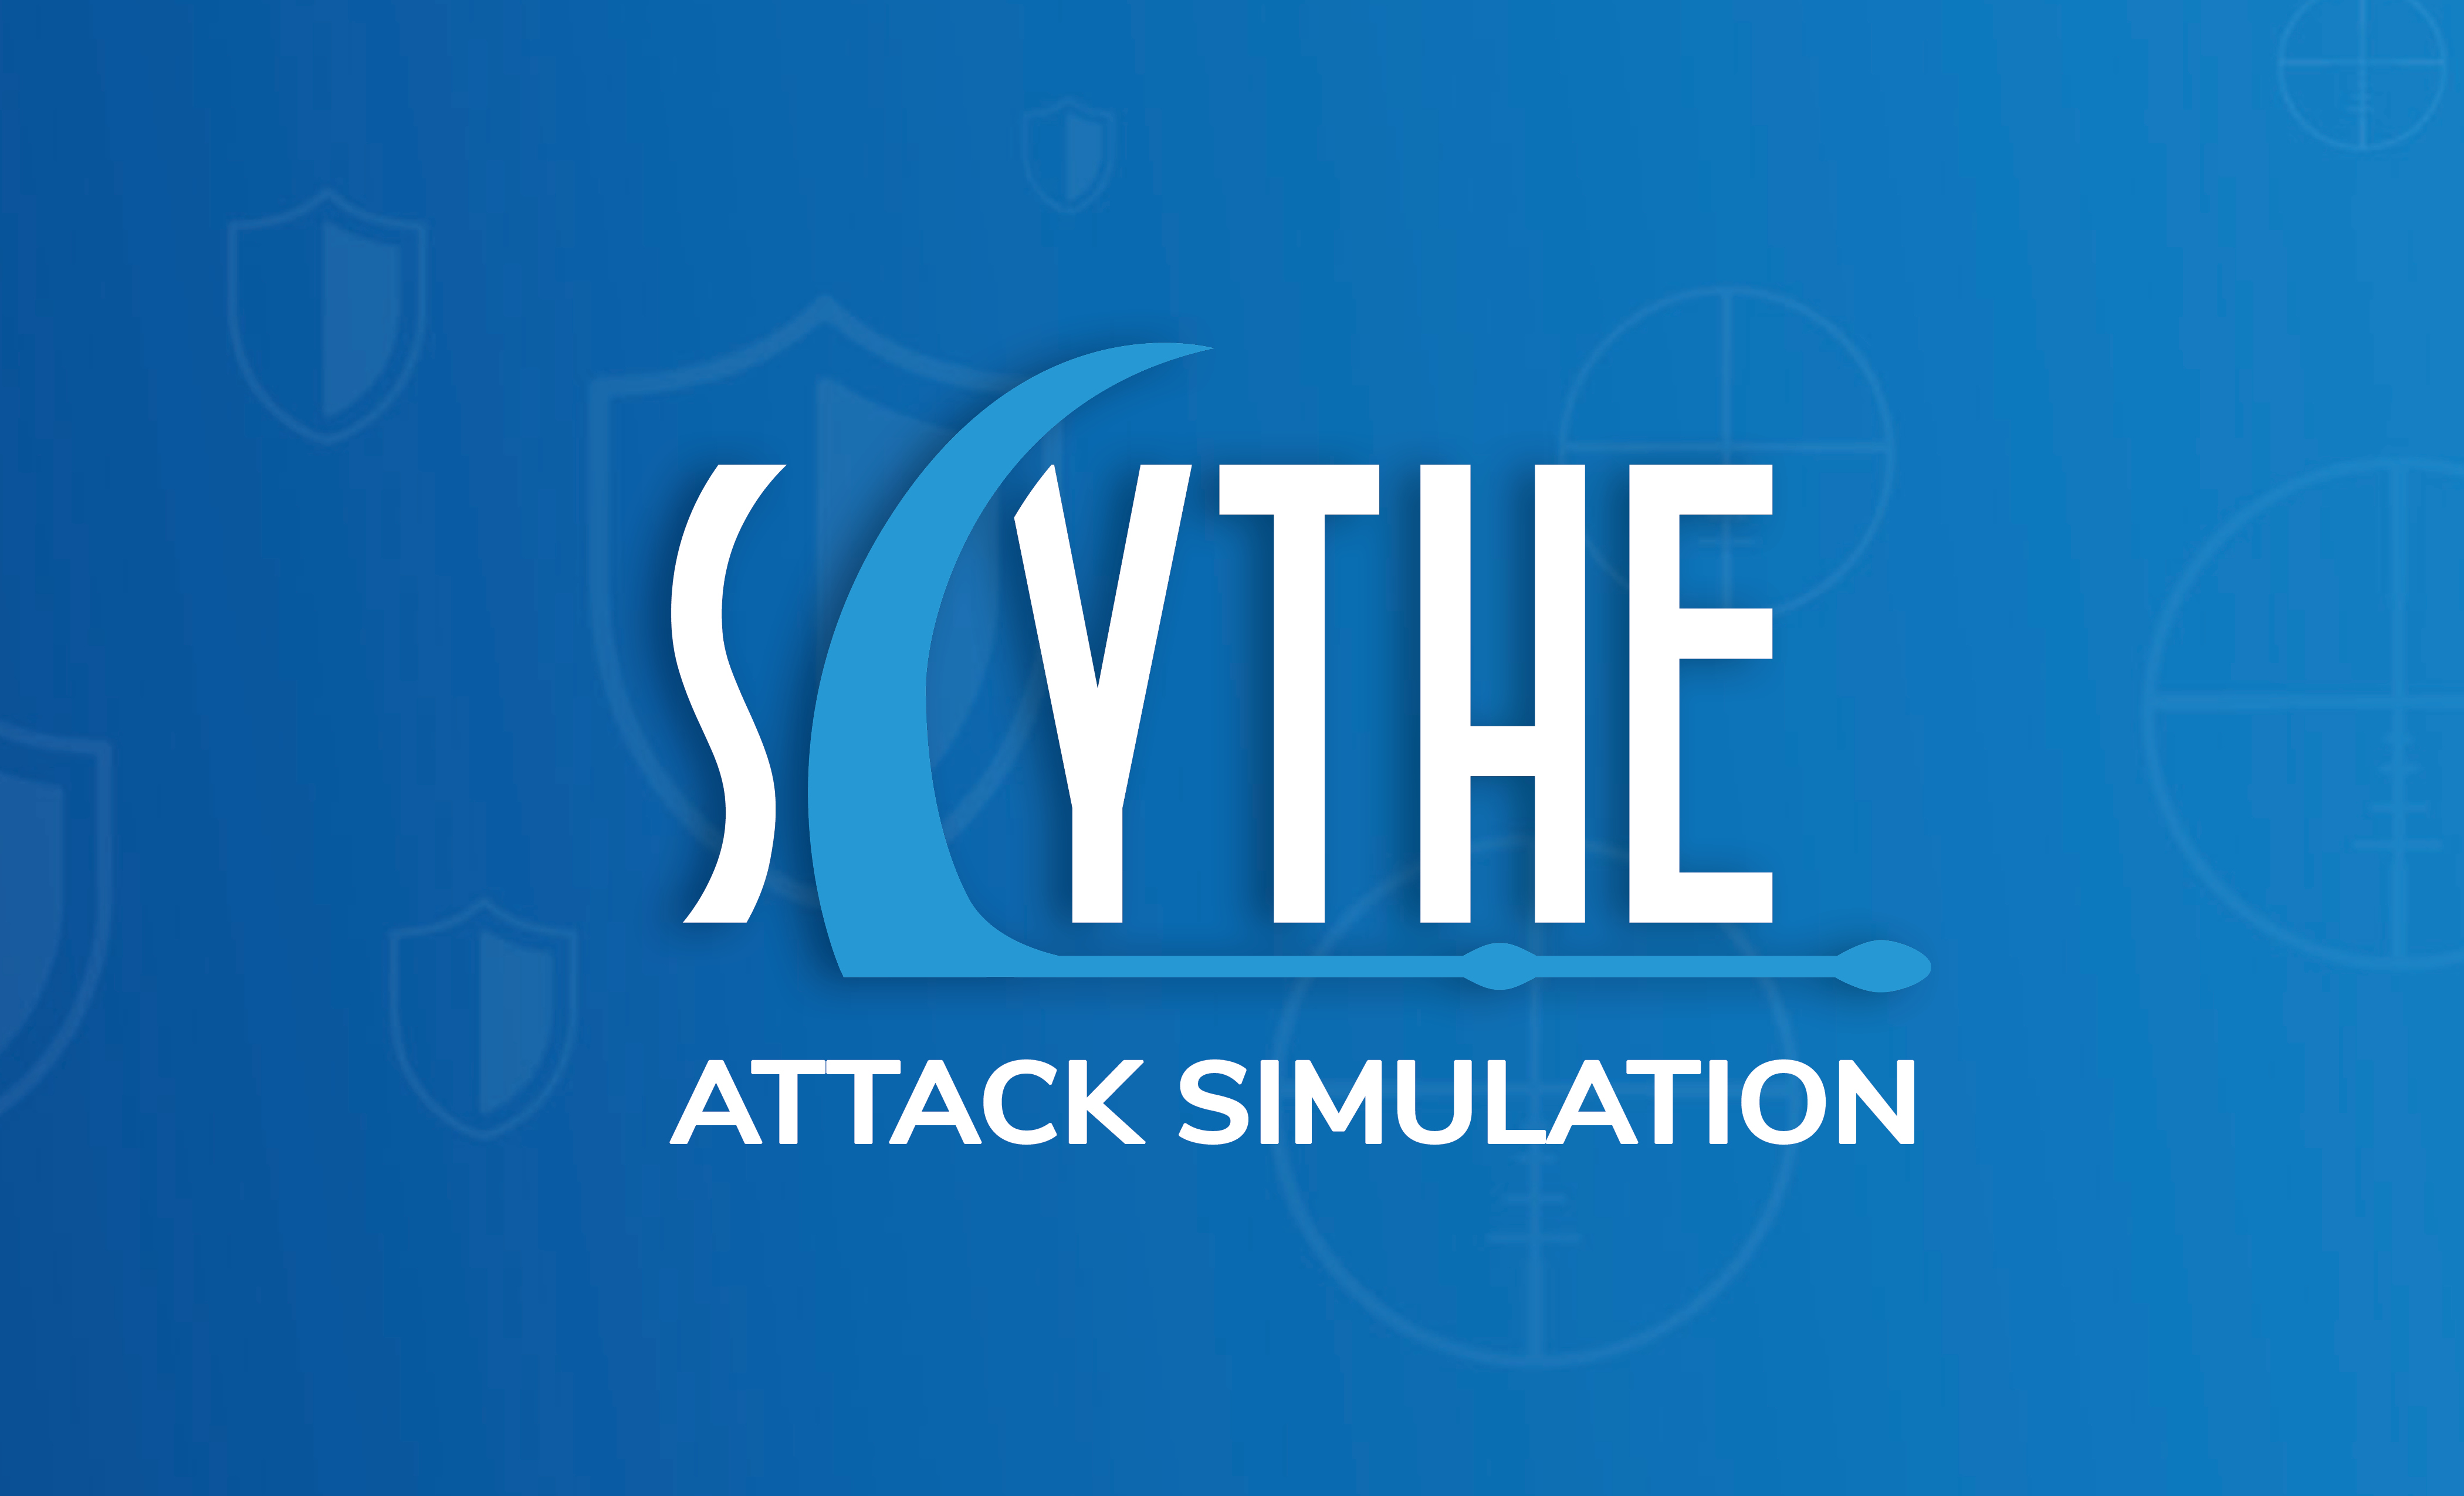 Breach Reality Check: Get More Realistic with the Latest in Attack Simulation